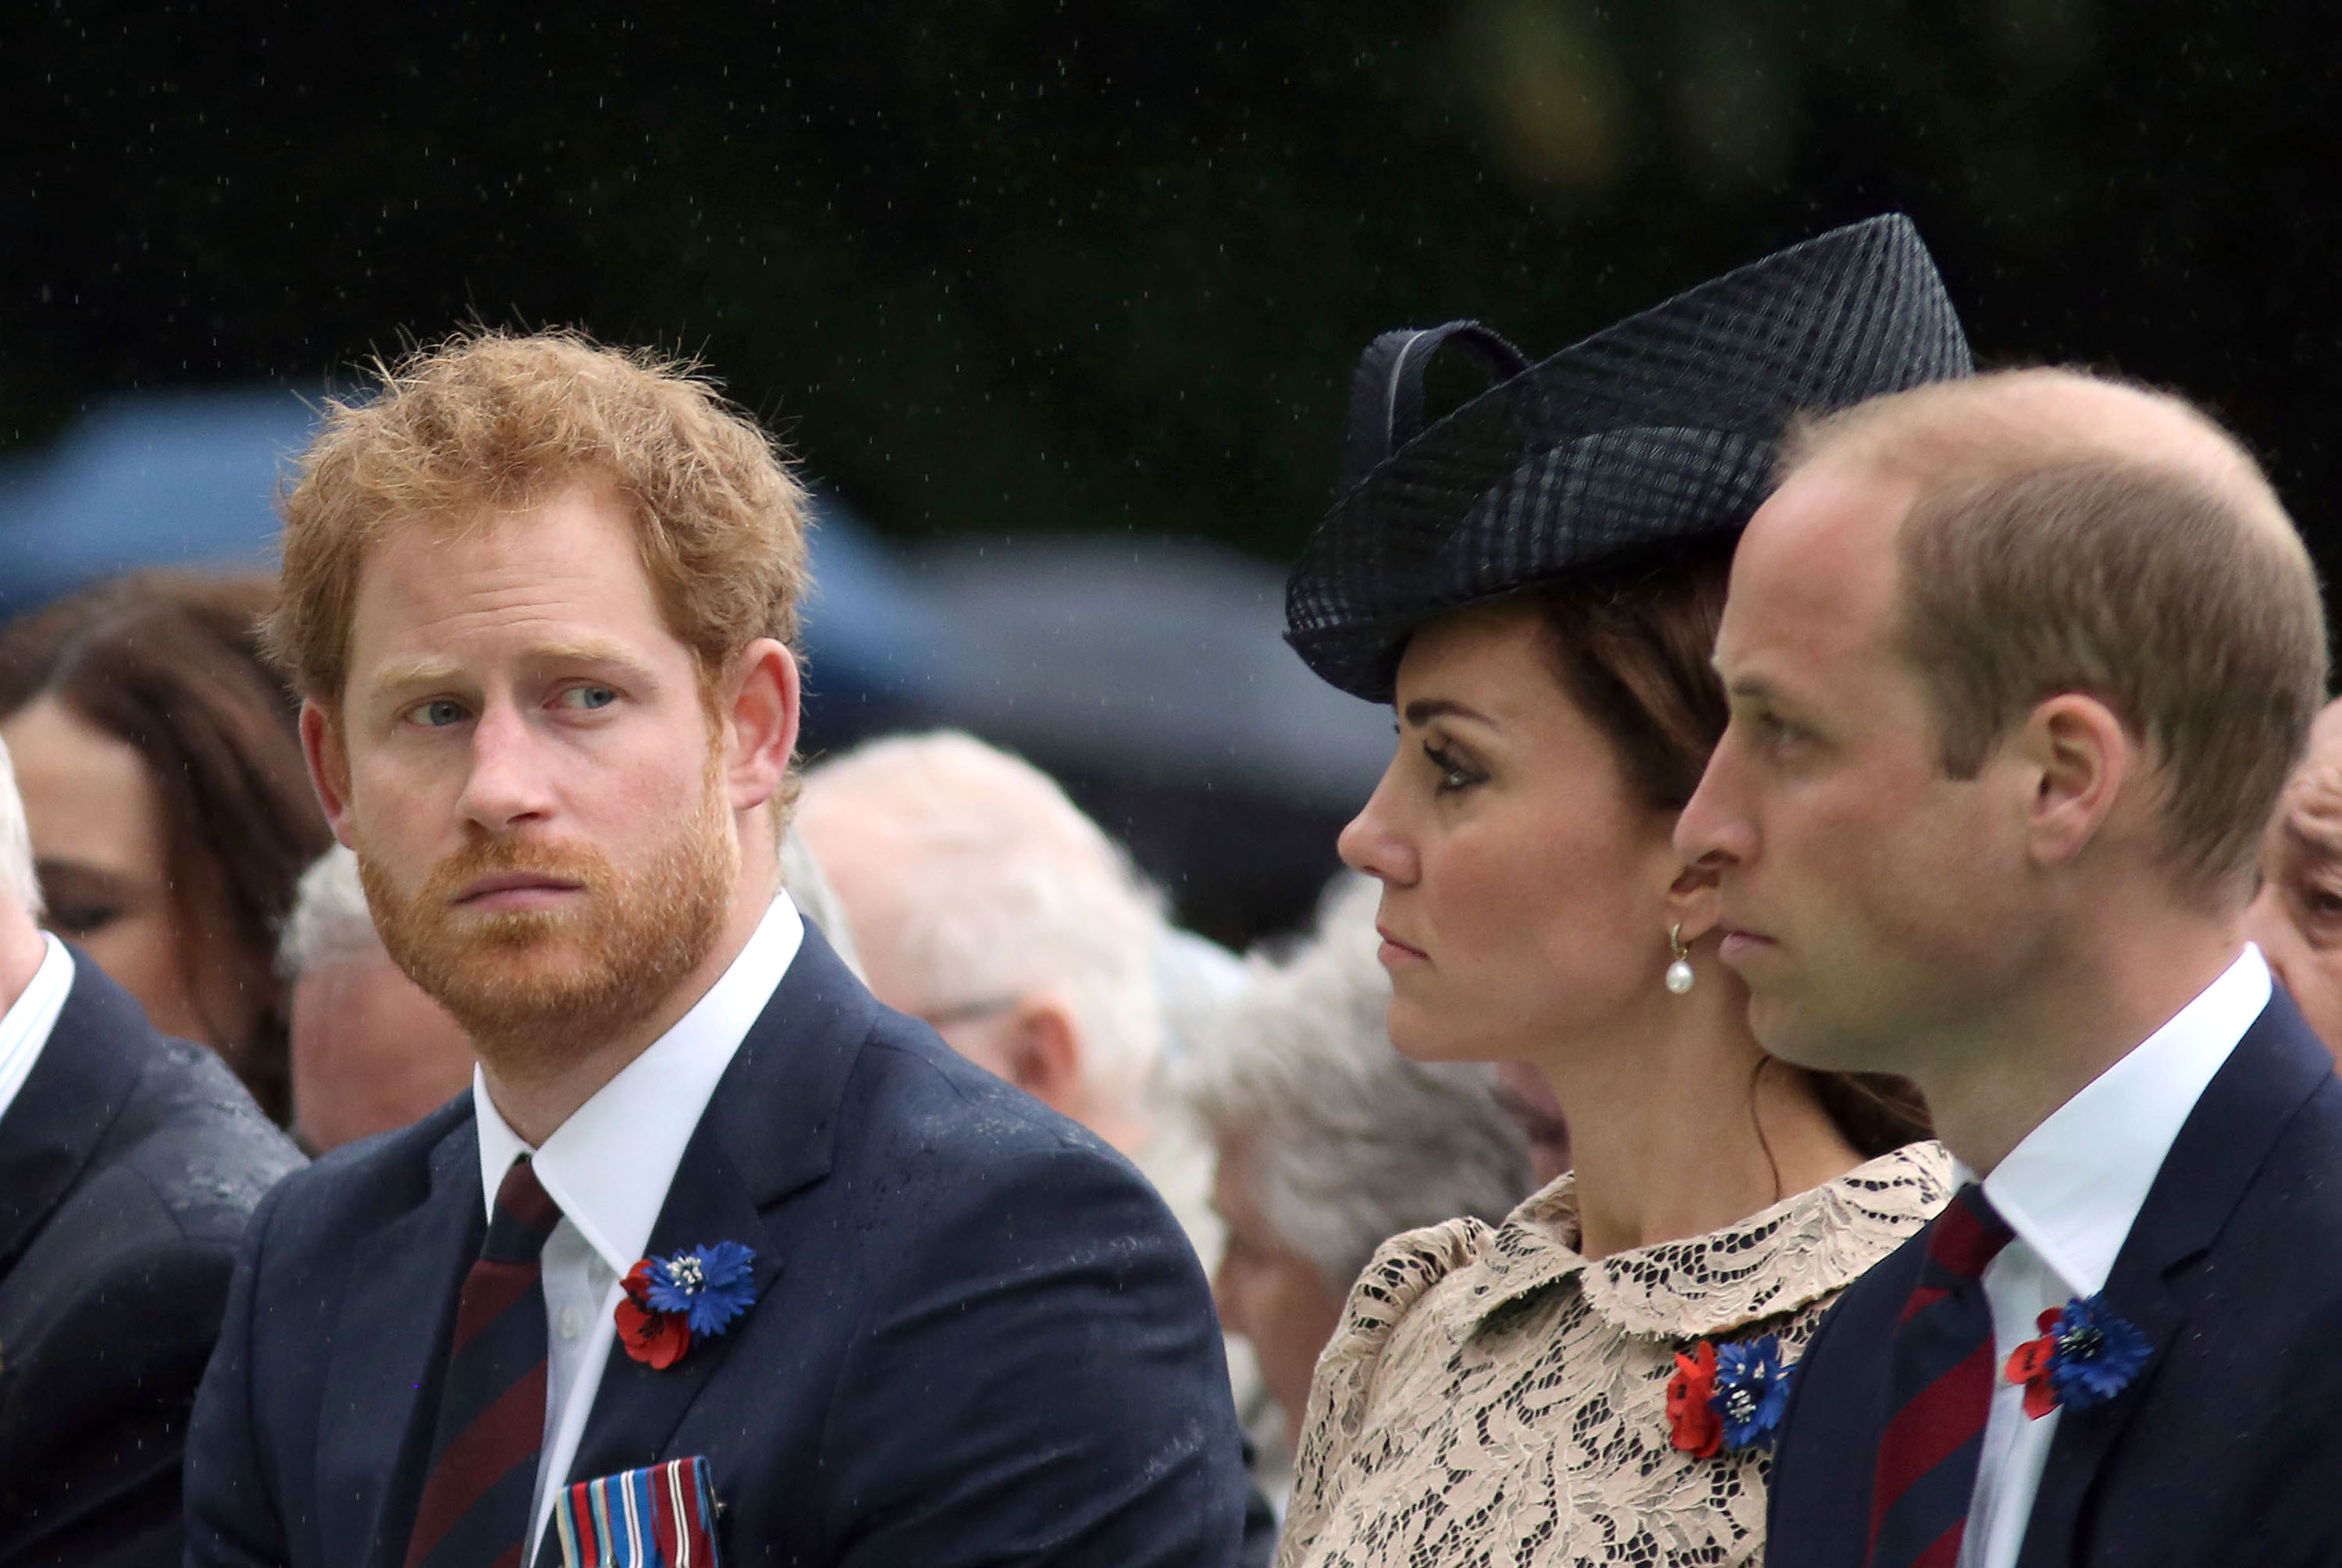 Prince Harry with Prince William, Duke of Cambridge and Catherine, Duchess of Cambridge